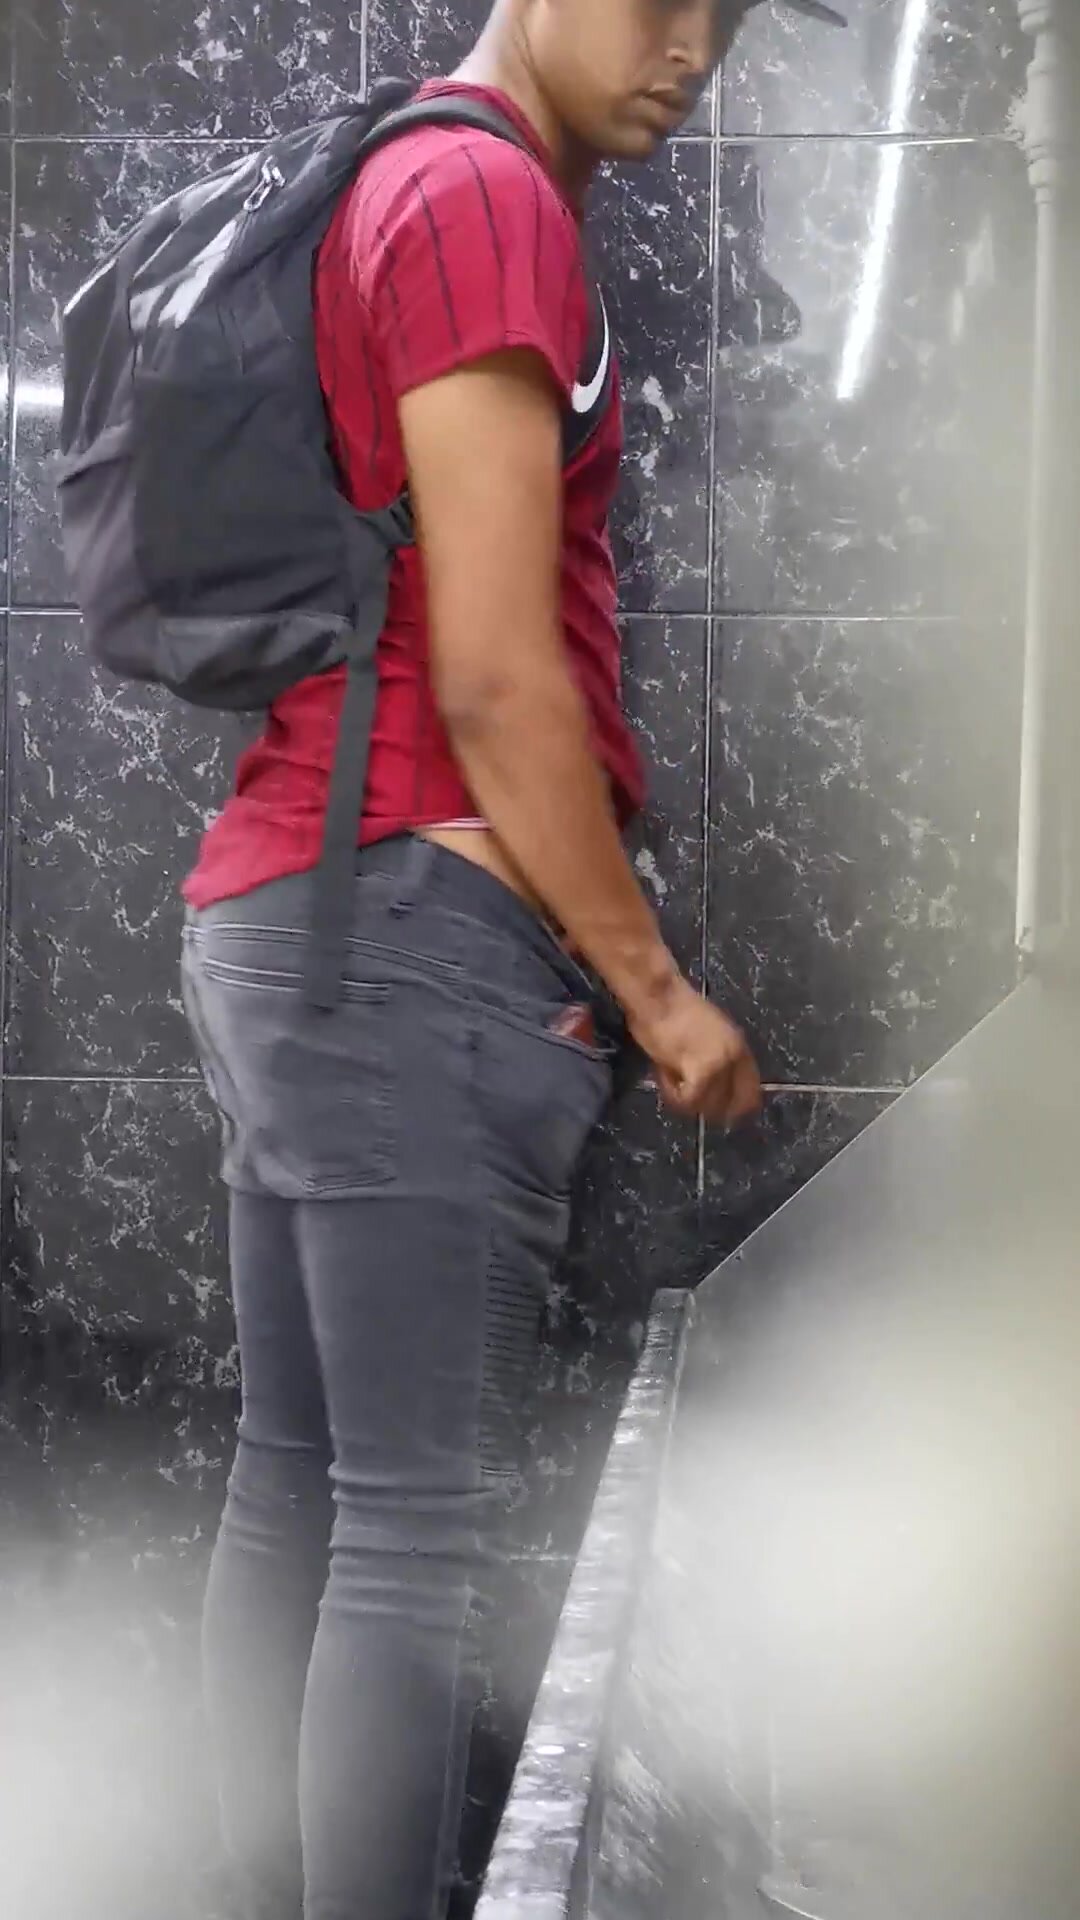 spy urinal chacal - video 2